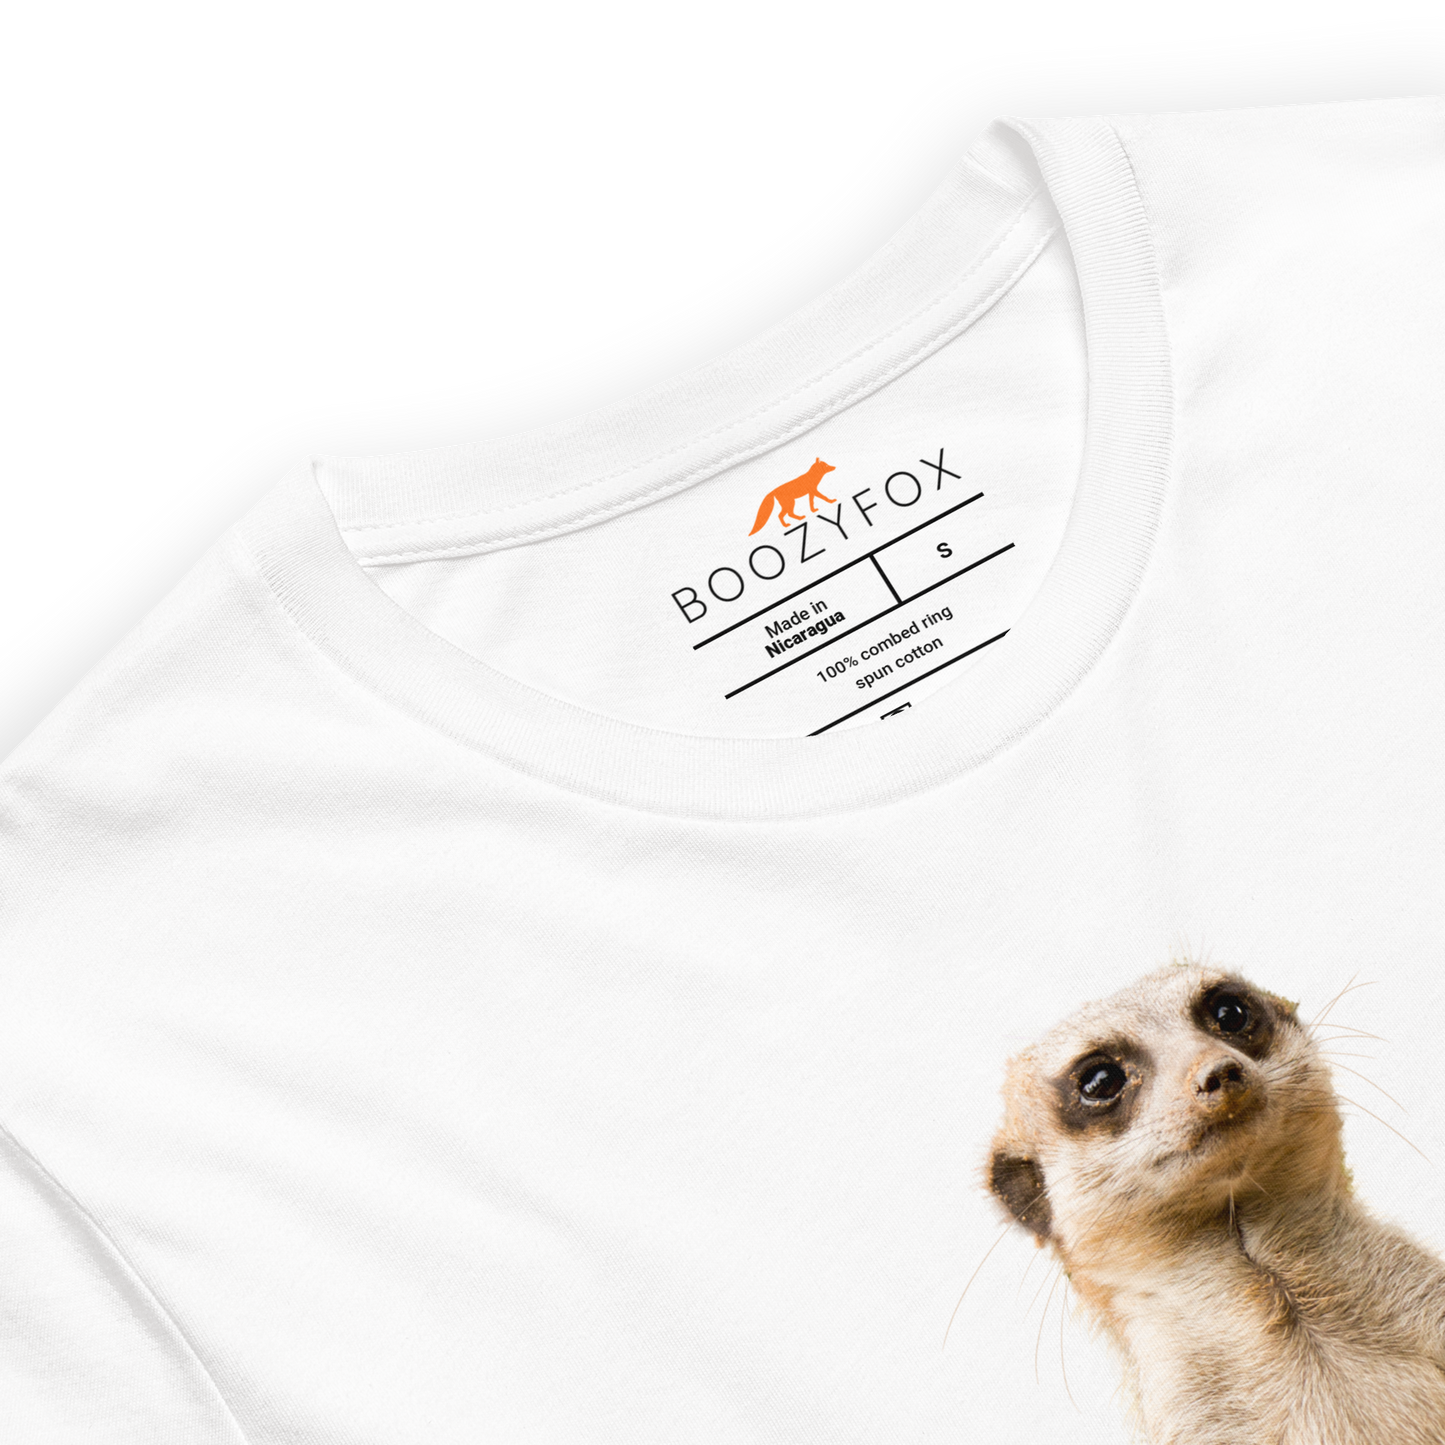 Product Details of a White Premium Meerkat T-Shirt featuring a hilarious Beerkat graphic on the chest - Funny Graphic Meerkat Tees - Boozy Fox